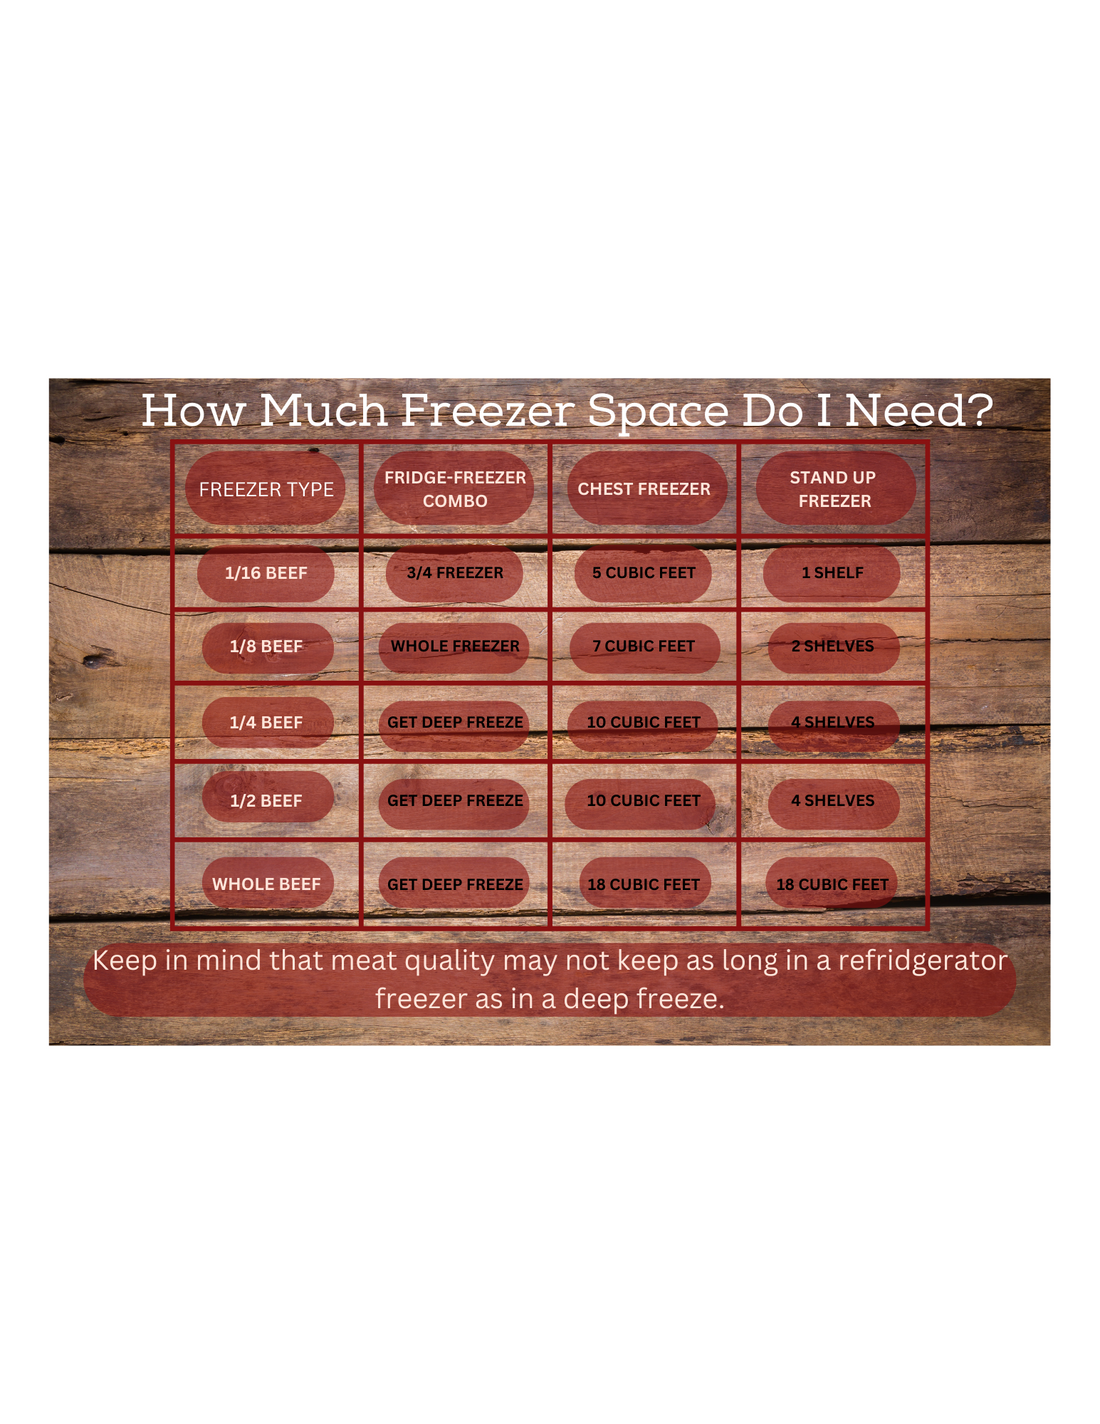 How Much Freezer Space Do I Need?